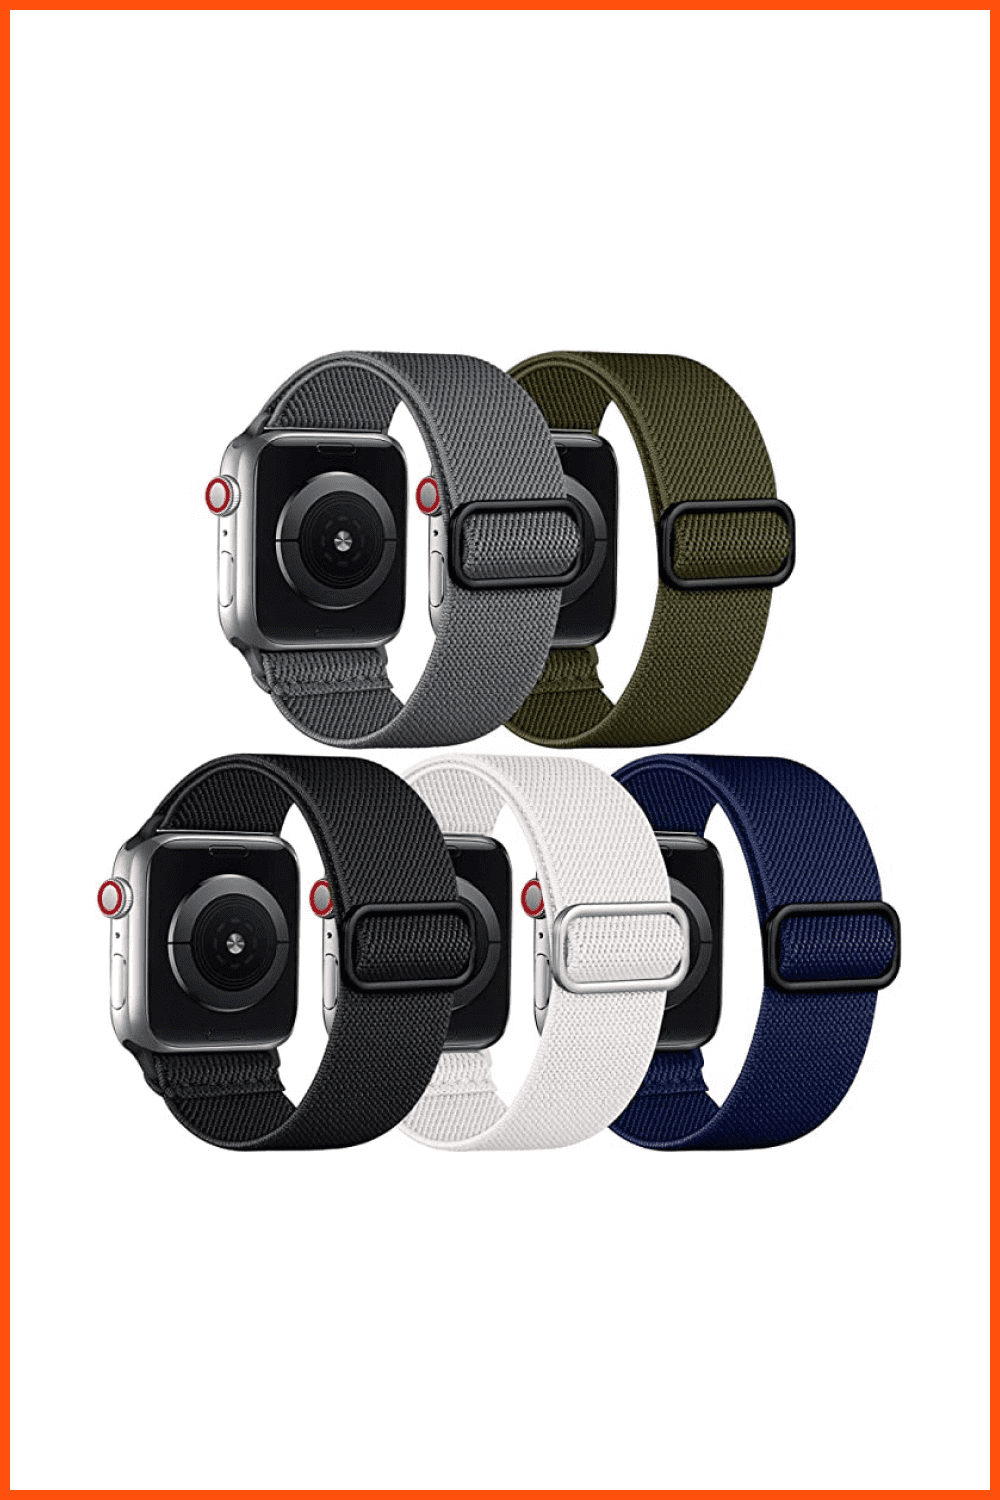 Apple Watches with 5 different colors bands.